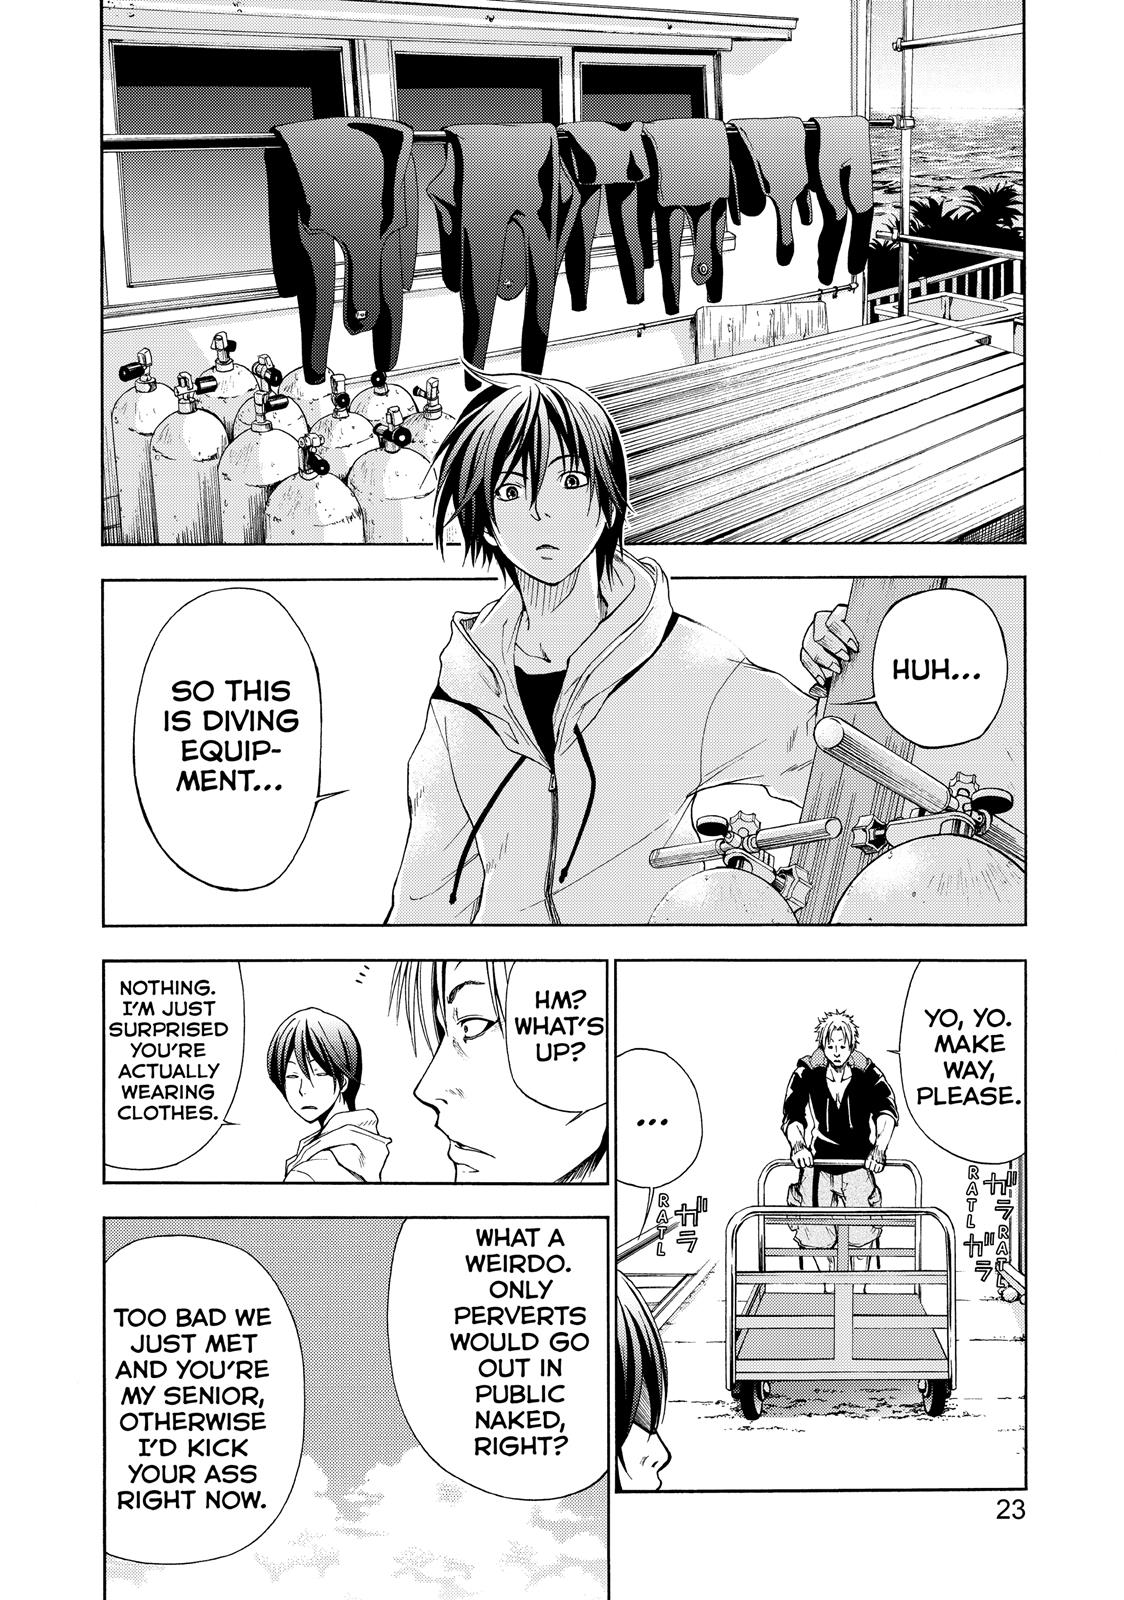 Grand Blue, Chapter 1 image 023